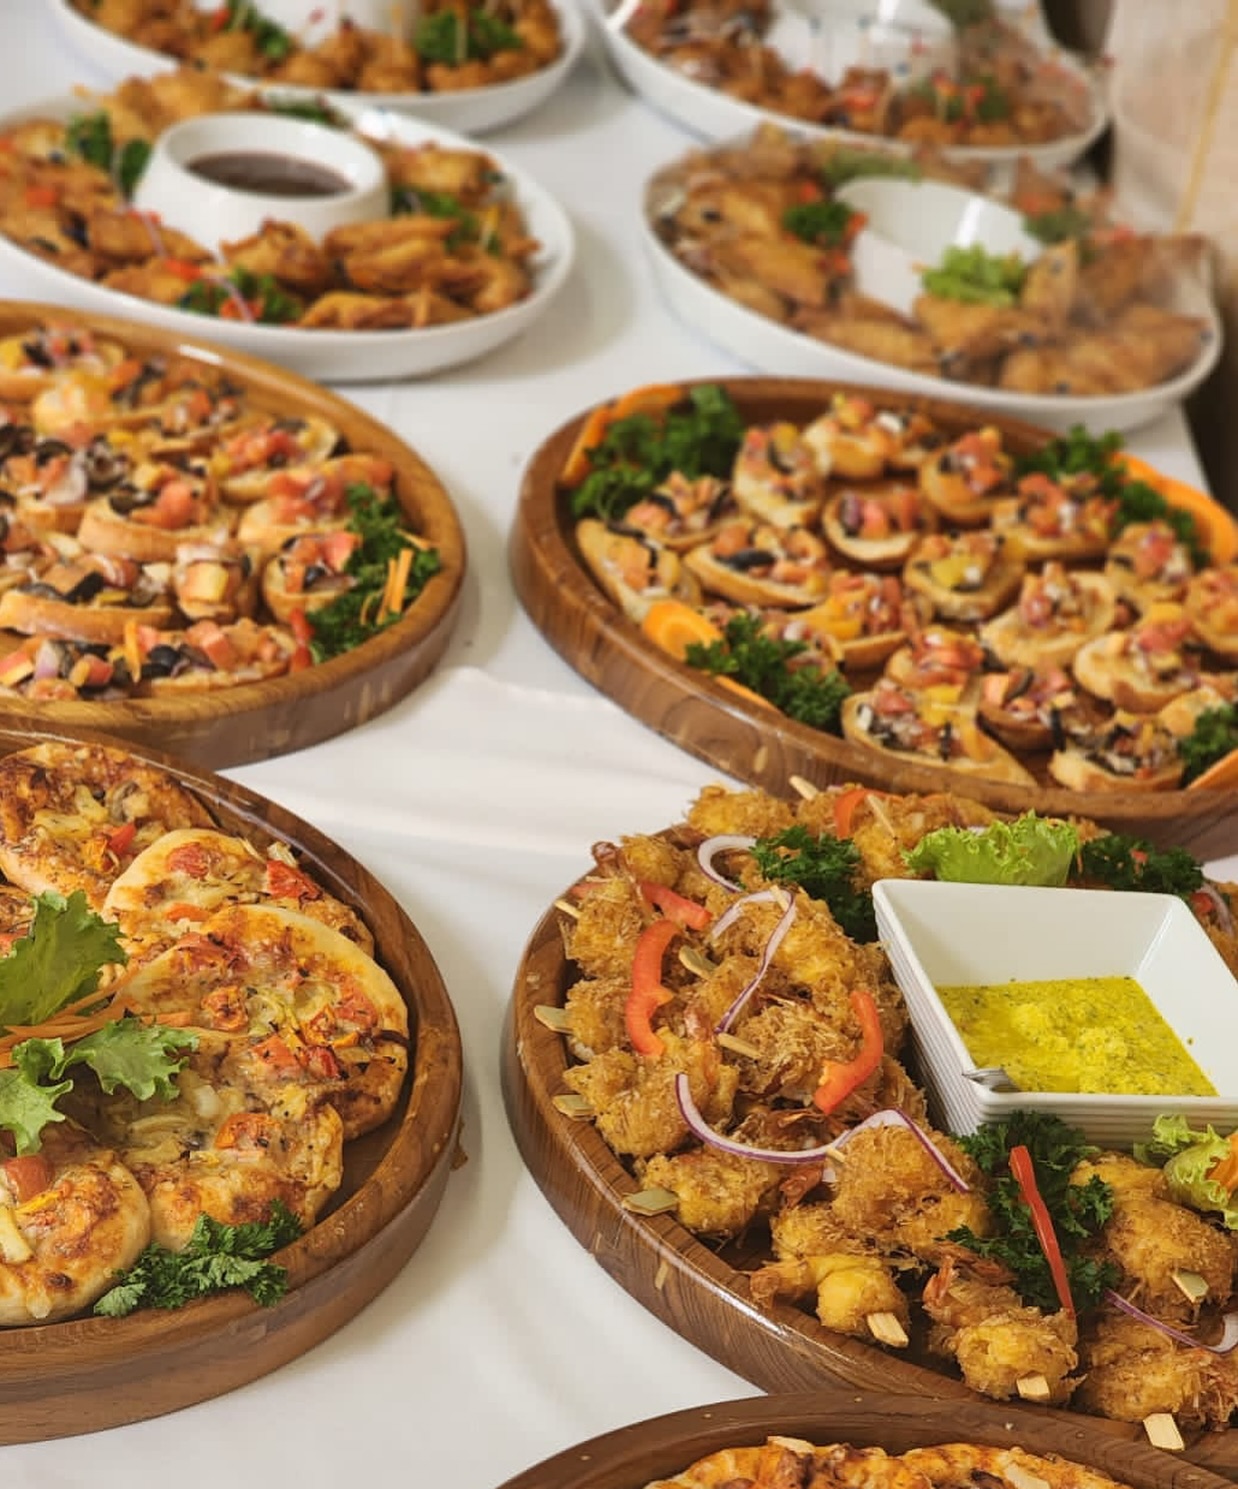 Superb Caterers Ltd - CATERERS